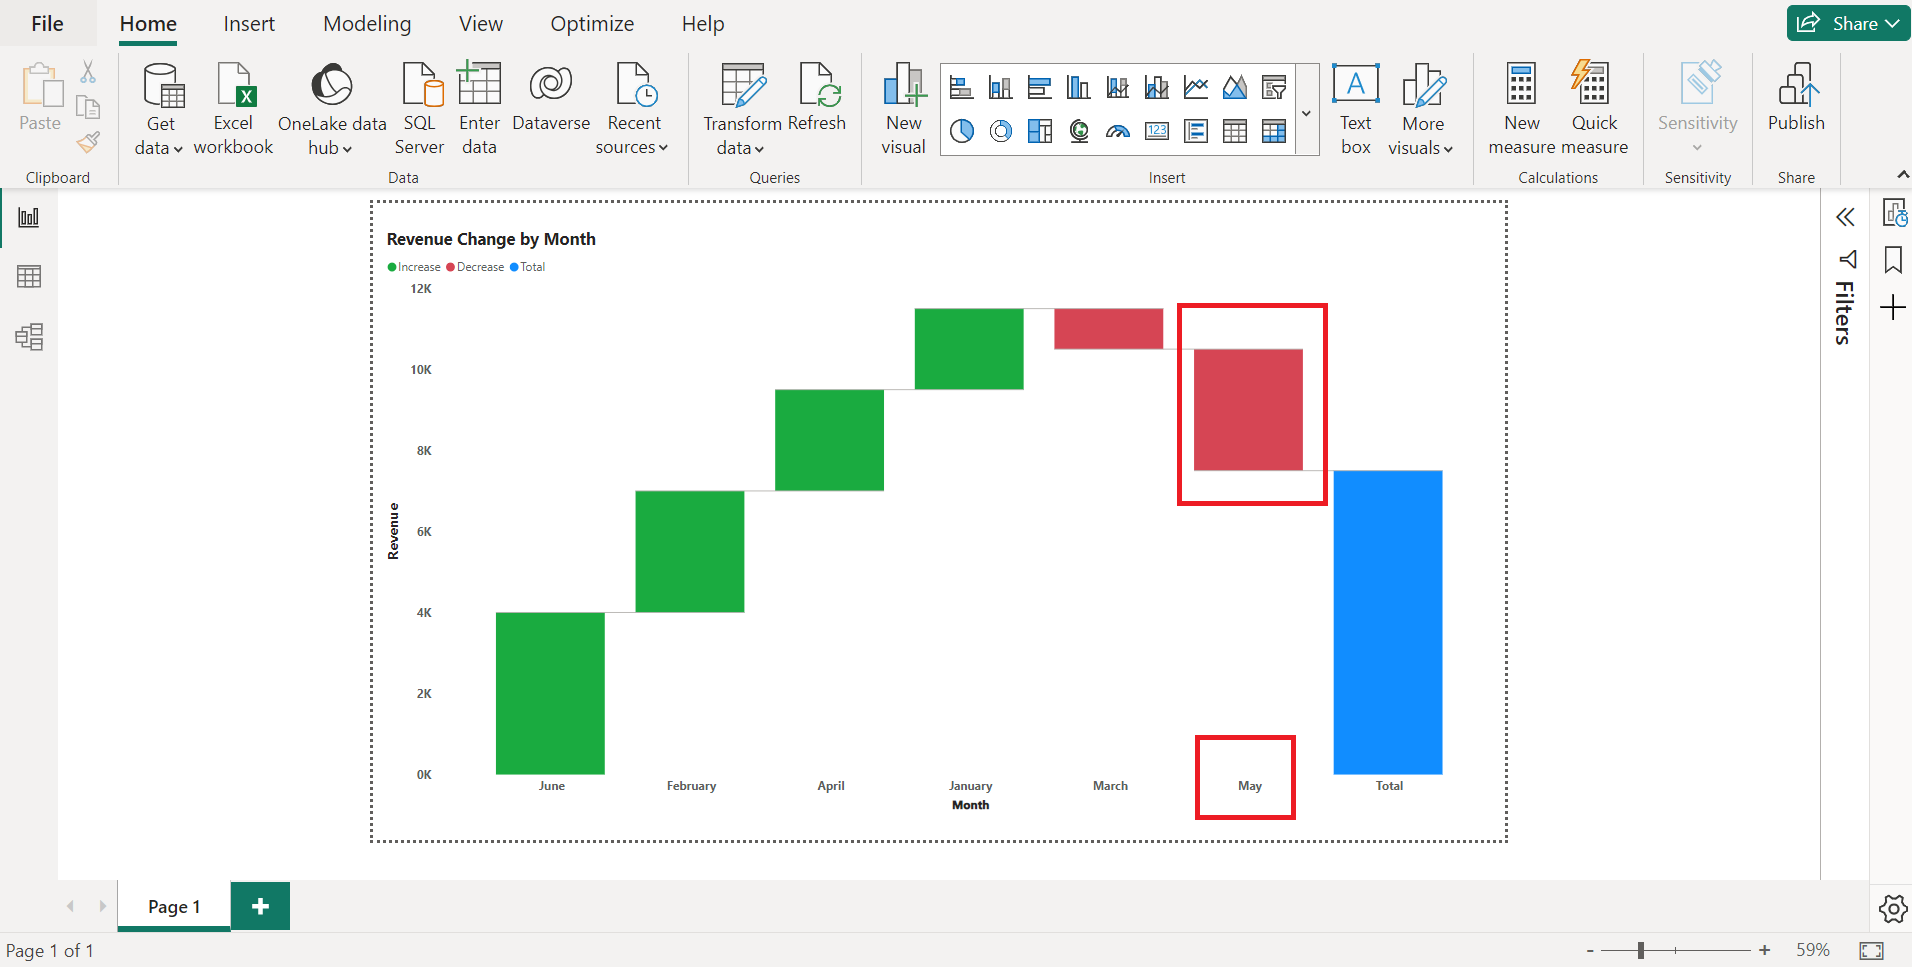 Interpret the waterfall chart's x axis or horizontal axis